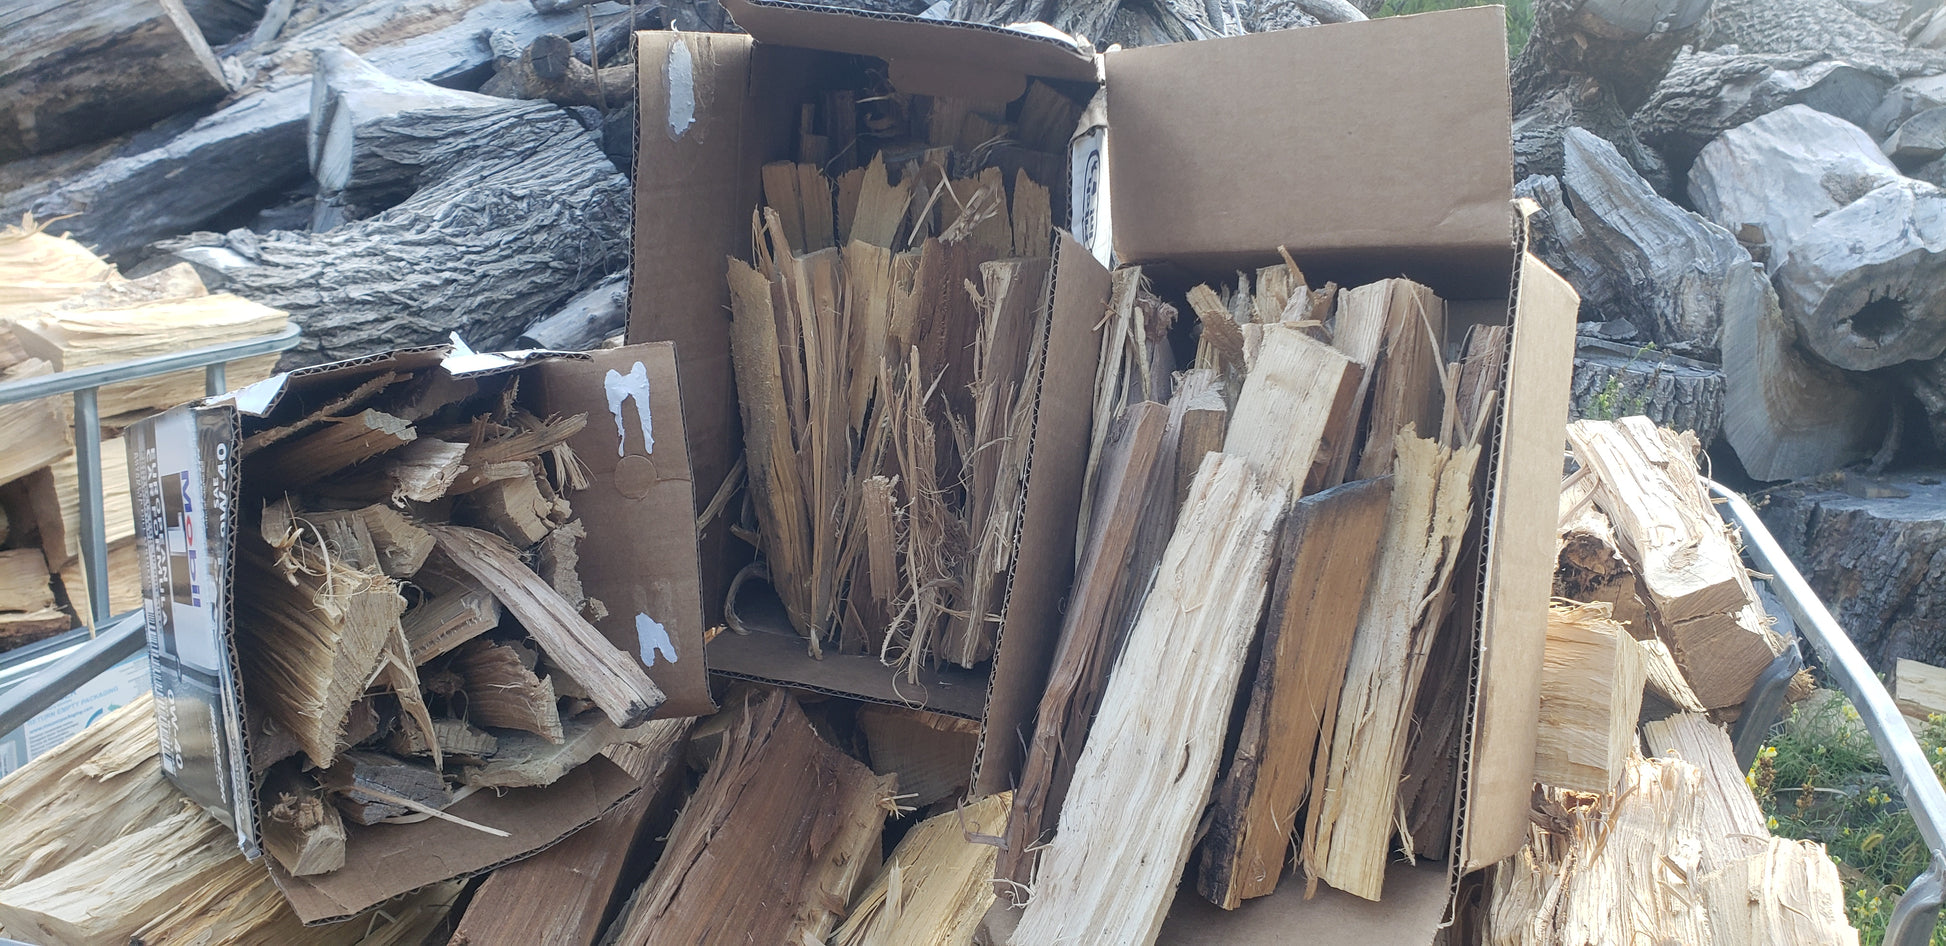 View of three kindling boxes